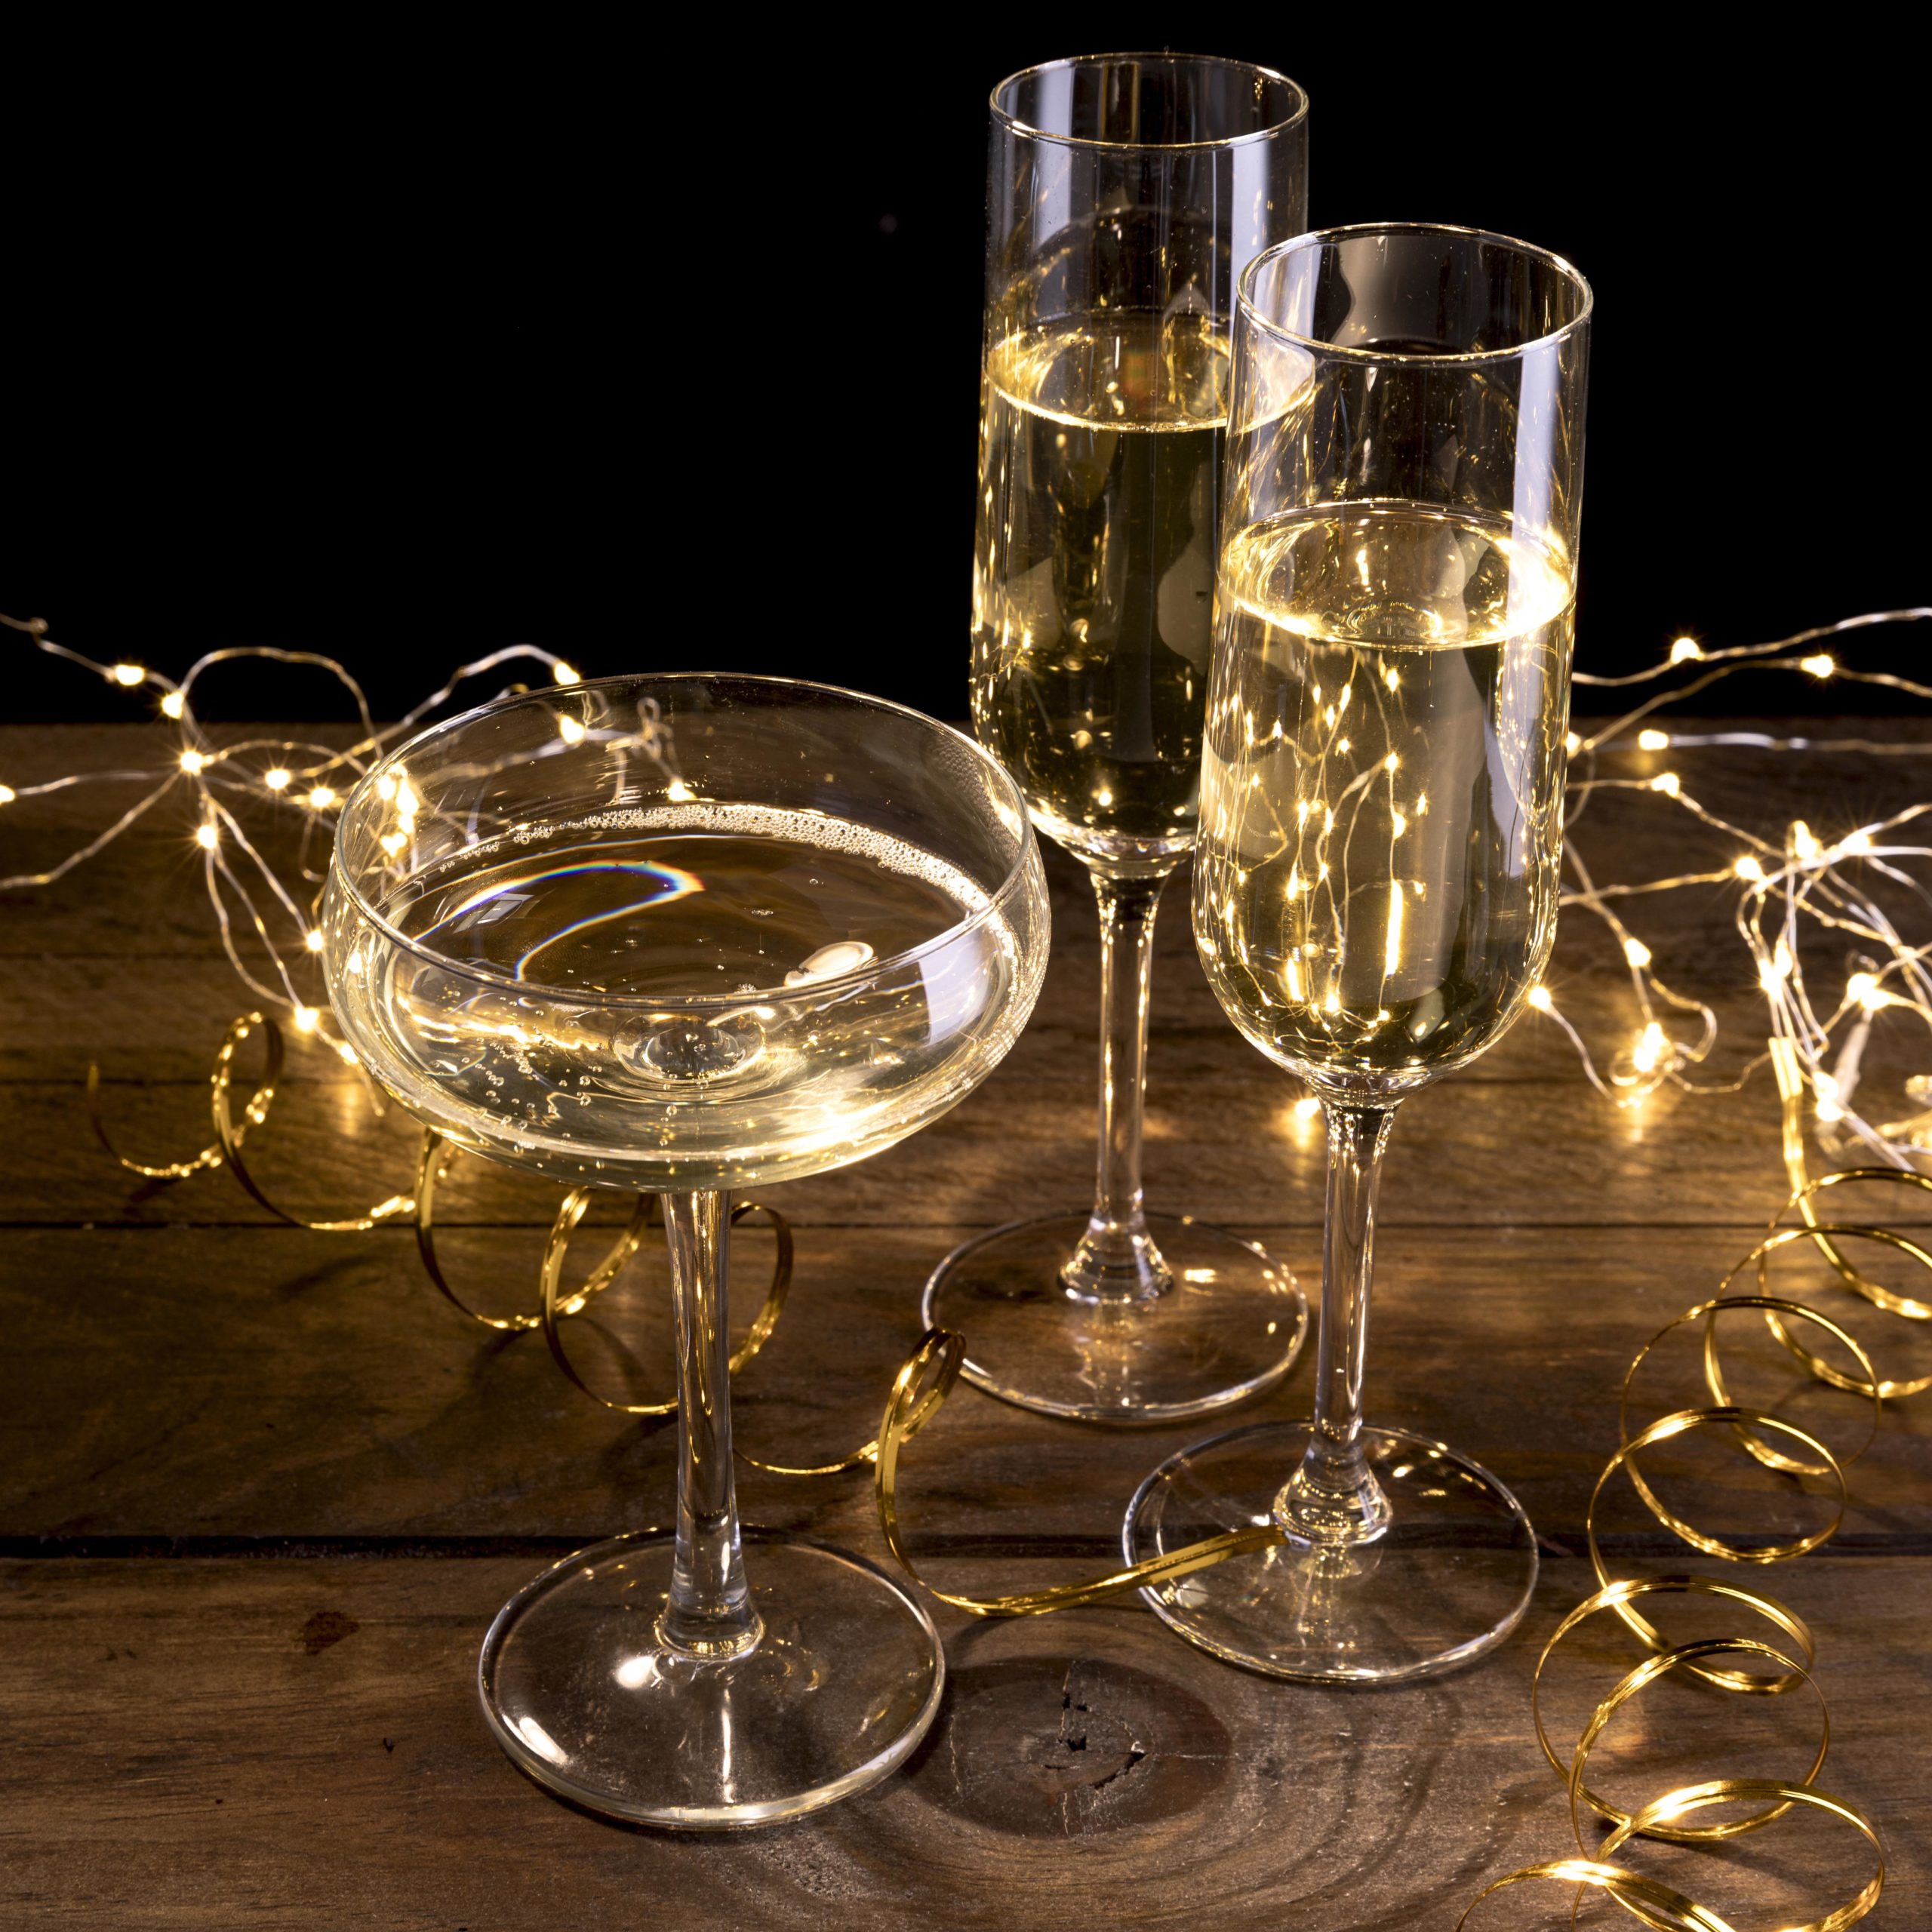 close-up-champagne-glasses-table